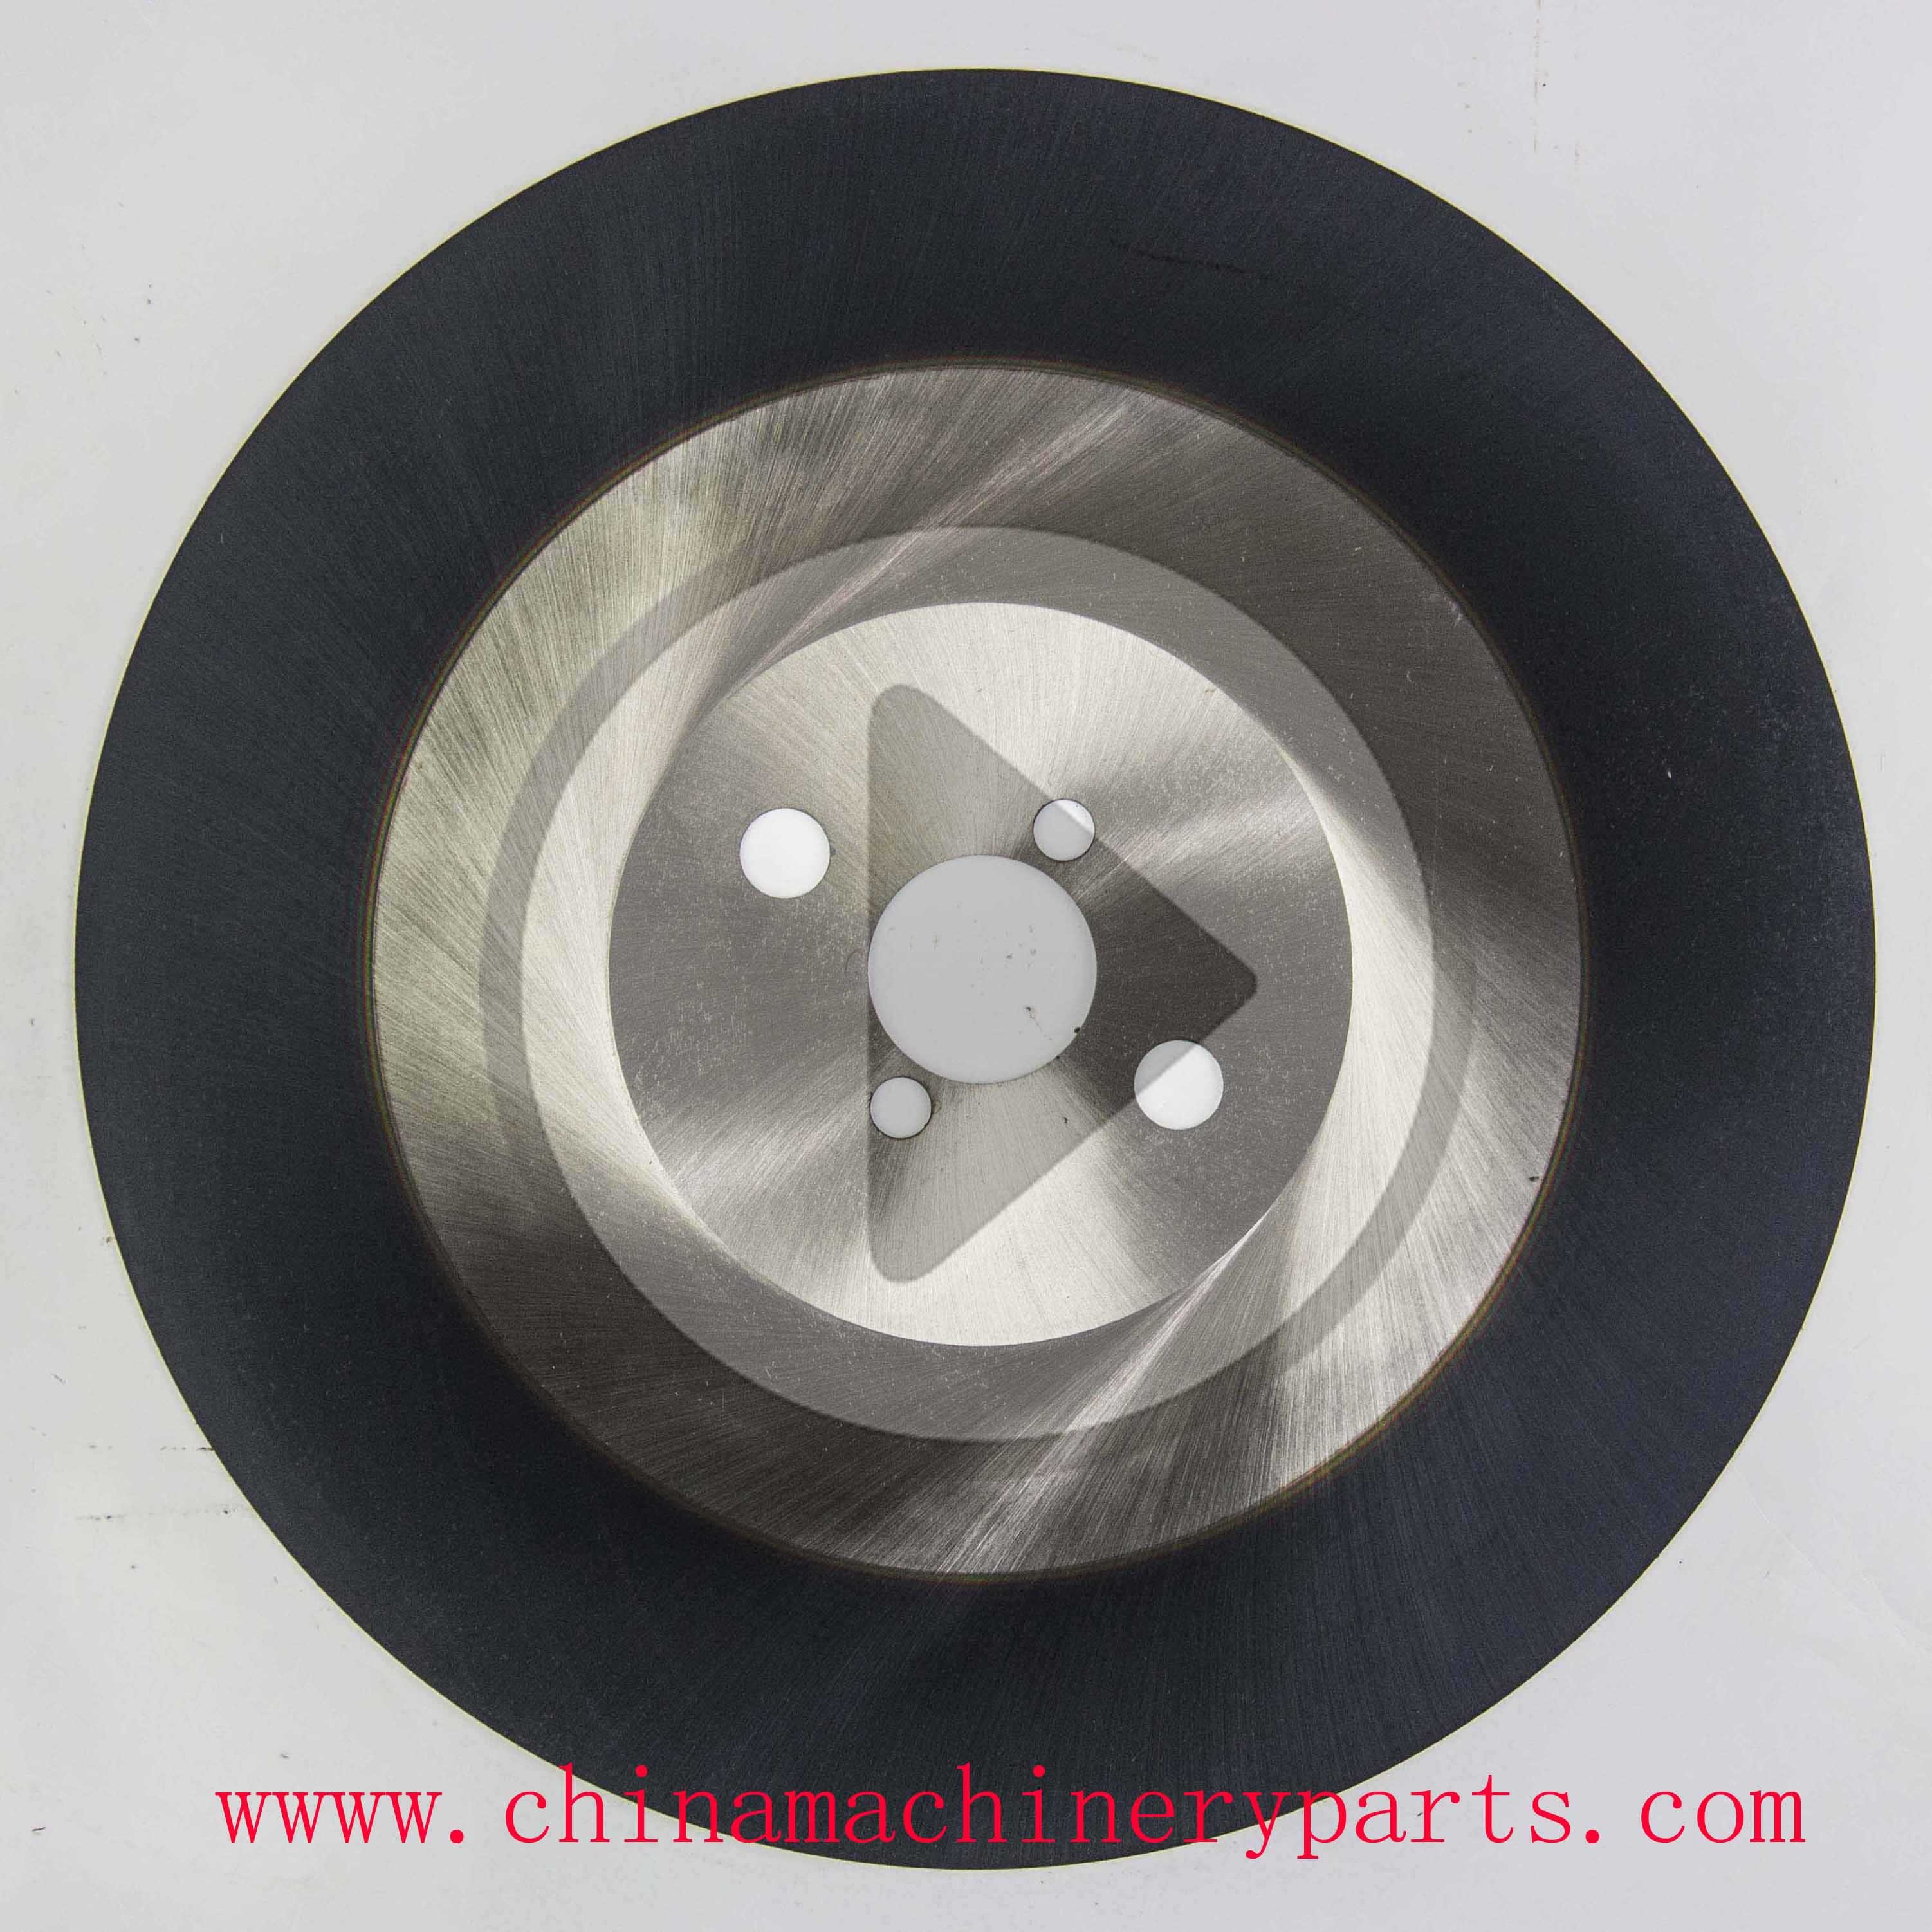 Kanzo Cutting Stainless Steel and Steel Pipe of M2 M42 M35 Dm05 HSS Circular Saw Blade